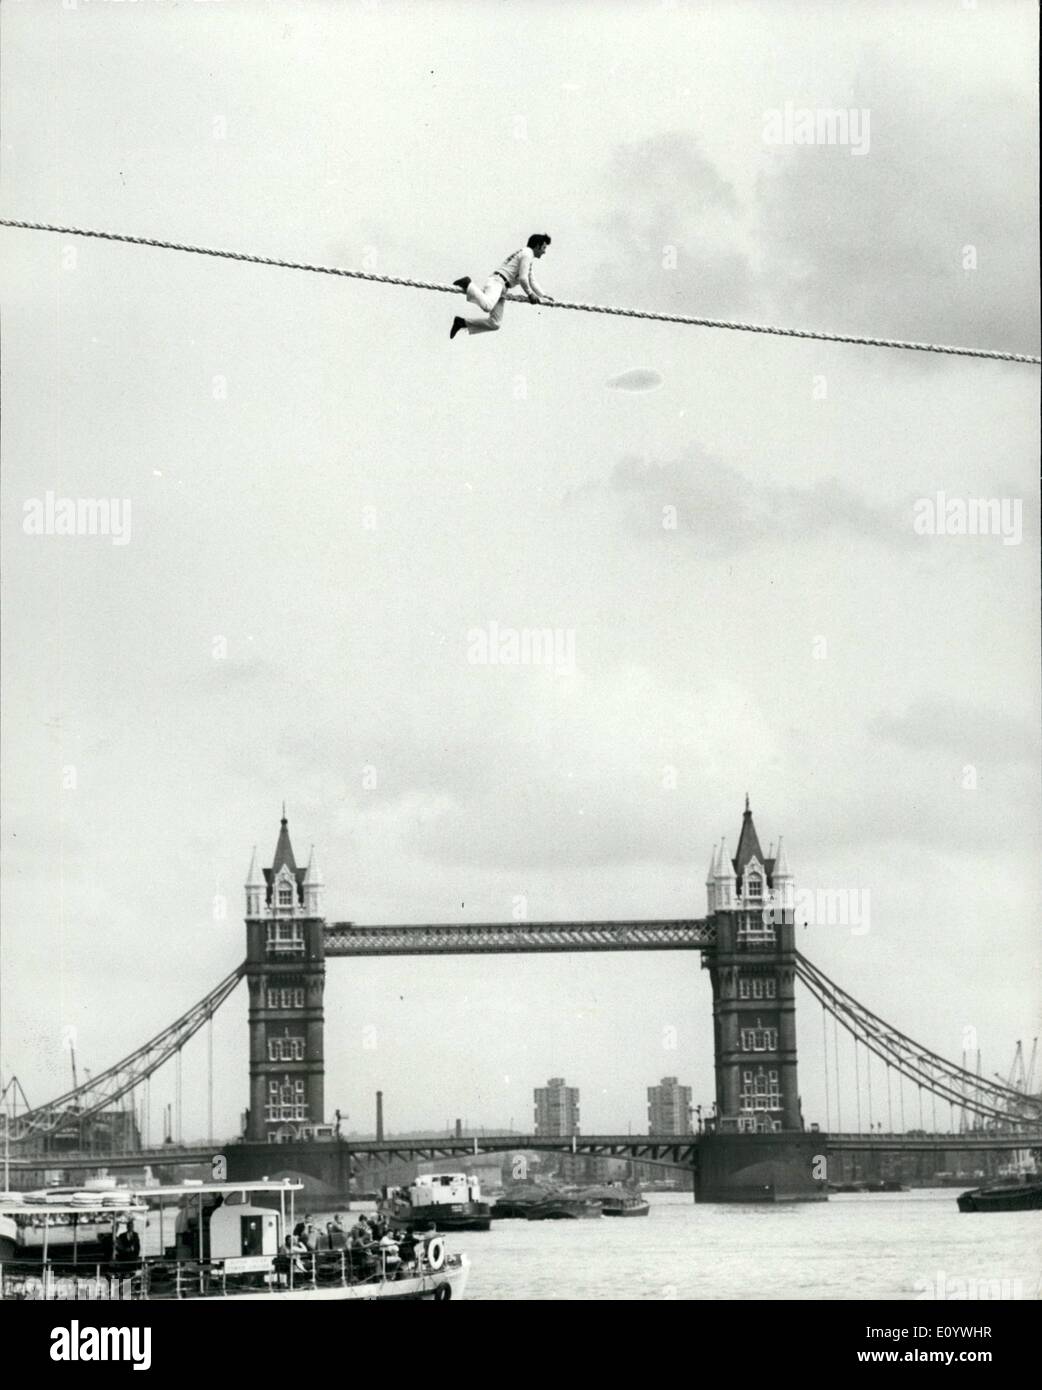 Aug. 06, 1971 - August 6th, 1971 The Charity tightrope walk that failed. 30-year-old Cologne Ã¢â‚¬Ëœspider-man' Franz Josef Burbach today made an attempt to make an 820-feet tightrope walk between two warehouse 60-feet above the Thames near Tower Bridge. But the attempt which was in aid of spastics failed after a series of mishaps. First his balancing pole was damaged so he tried to walk without it, but he didn't get very far, so he decided to crawl across, an only manage just over half way before falling off into the water Stock Photo